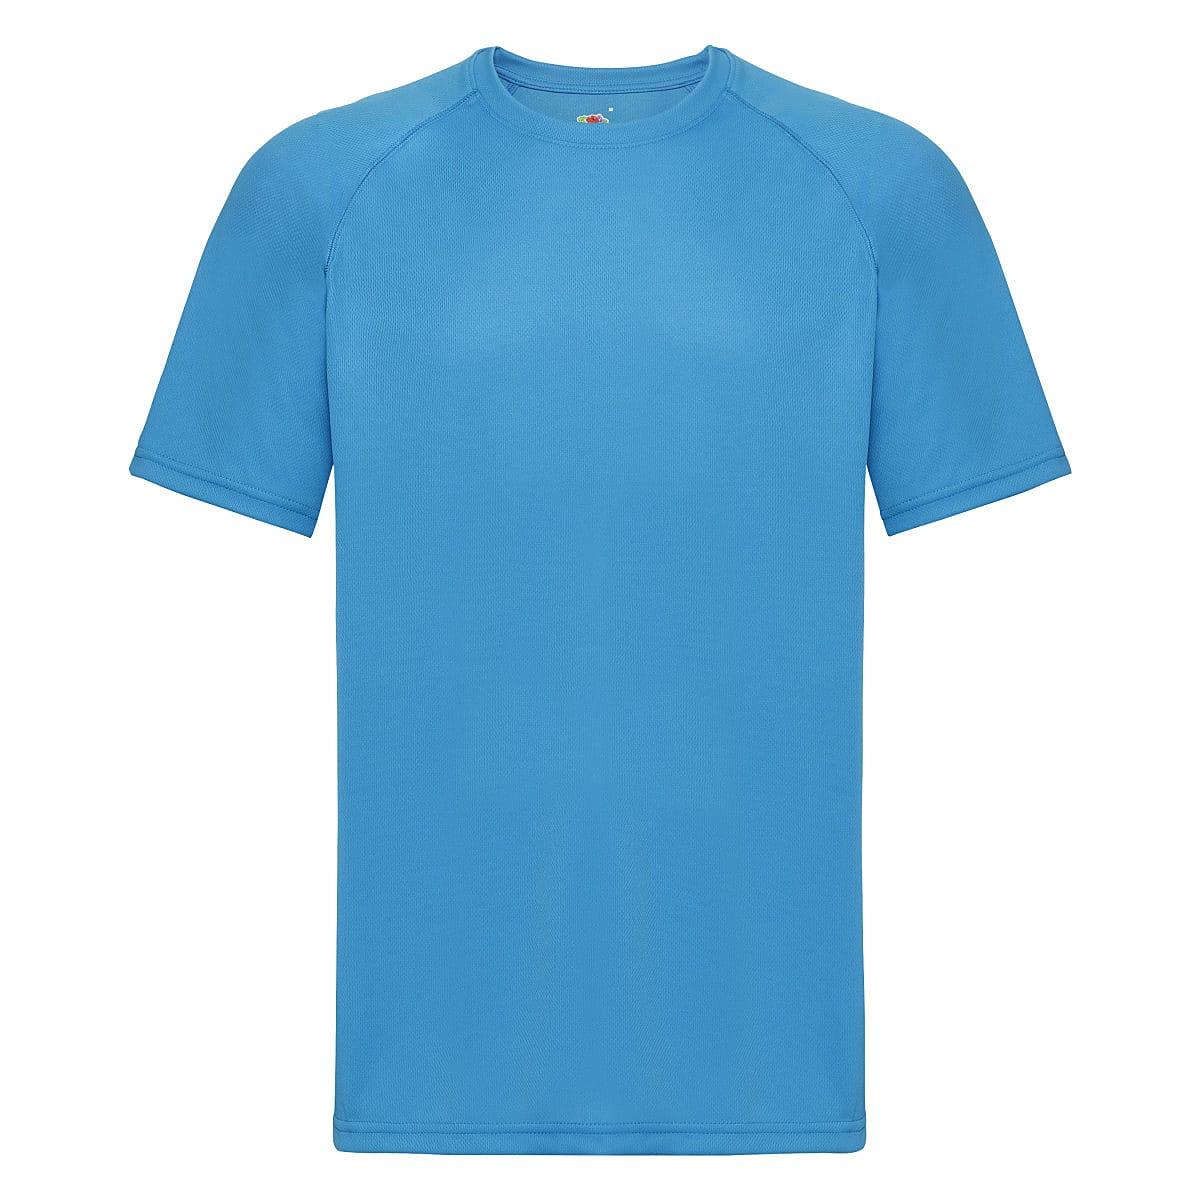 Fruit Of The Loom Mens Performance T-Shirt in Azure Blue (Product Code: 61390)